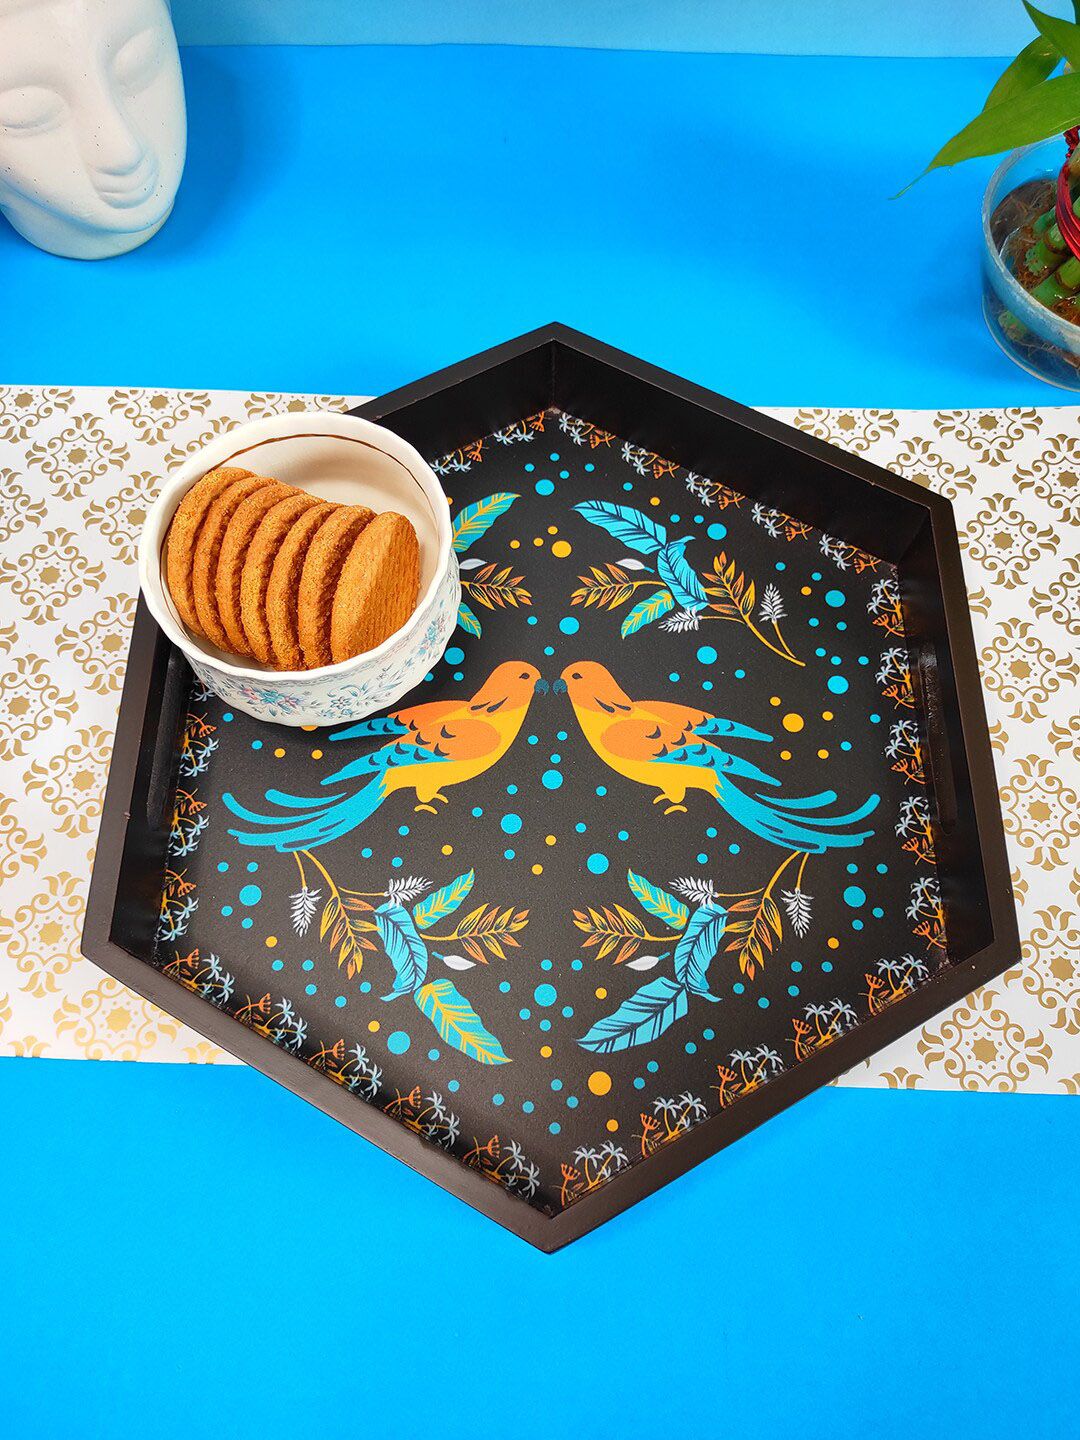 CRAYTON Green Printed Small Hexagon-Shaped Wooden Tray Price in India